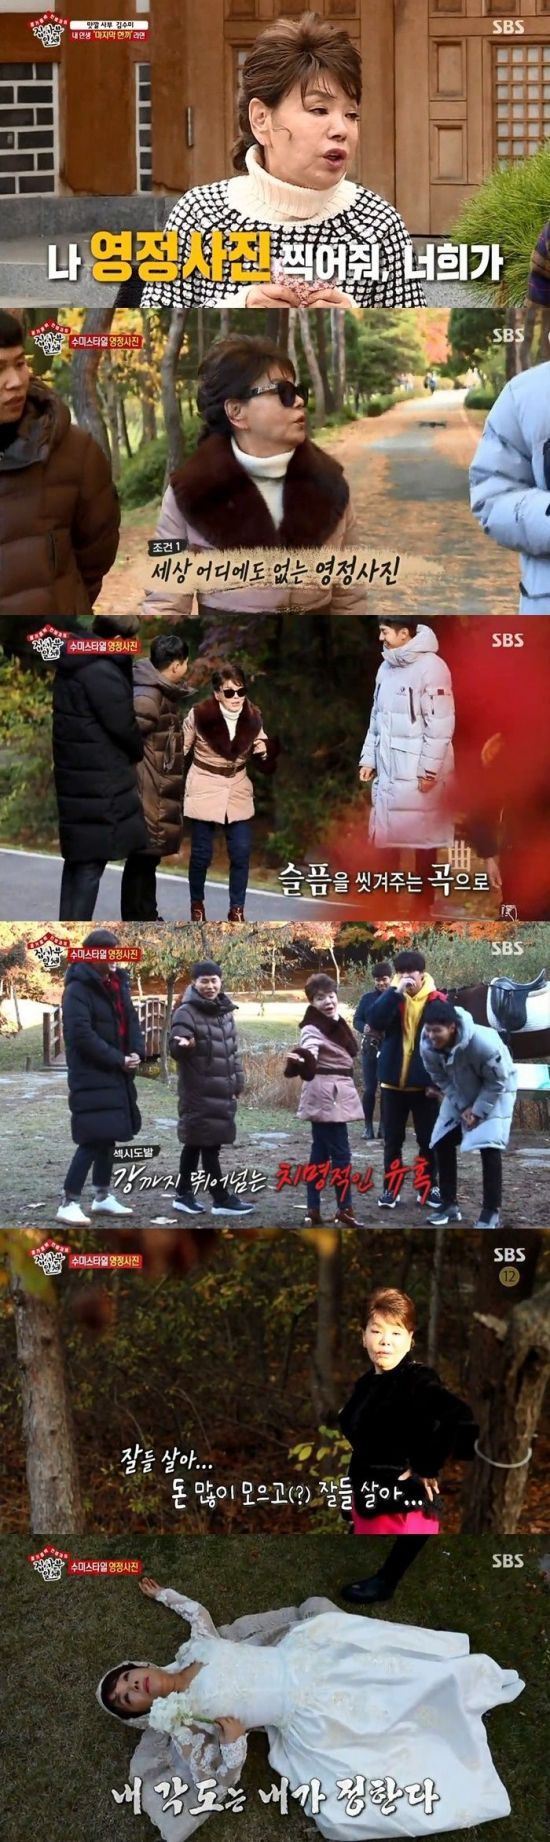 All The Butlers members had time to think about the last Haru of my life with Master Kim Soo-mi.According to Nielsen Korea on the 19th, the SBS entertainment program All The Butlers broadcasted on the 18th recorded 10.2% of the nationwide household ratings.This is a 1.6 percentage point increase from the broadcast on November 11.On this day, the production team of All The Butlers told Lee Seung-gi, Lee Sang-yoon, Yook Sungjae, and Yang Se-hyung, The master who met today asked me to take a picture beyond your life shot.Shin Dong-yeop, a comedian who made a phone connection with a hint fairy, said to the master, It is the aid of Girl Crush. He is a person who talks 39 gold over 19 gold.Sungjae and Sangyun may cry. Today, it would be better to be ready to become tattered. Kim Soo-mi then appeared as a master, overpowering the members with charisma.If it was the last Haru of O-nu-ri, I wanted to sleep in a hanok, he said. As it is born, death is not my will. I am 70 years old.Think of it as your last day.I want to eat the food I want to eat the most if I am the last Haru of O-nu-ri and give all the answers to the questions you are curious about. Kim Soo-mi also revealed his diary: I saw my colleagues die two years ago and my best friend died last year. I definitely die.I read the diary of my youth, and the diary is a letter I write to me in the future. He advised members to develop their diary habits.Kim Soo-mi said, If I am the last Haru of my life, I will eat kimchi in steamed sweet potatoes. He set up a delicious sesame leaf kimchi, par kimchi, and mucheong kimchi prepared by himself.When Lee Seung-gi asked, What will you do after eating rice? Kim Soo-mi said, You take a picture of the spirit.I want to take a picture of a portrait that can not be seen anywhere. Kim Soo-mi said, I am not a general portrait, but I will take it beautifully.Its cool, he said.Kim Soo-mi asked the members to take a picture of Youngjeong, which is nowhere in the world after moving to a beautiful park with maple leaves.Kim Soo-mi emphasized, I will use my photo today as my portrait photo, so I can buy it until I die, so I can make a smile while I feel it.Kim Soo-mi also painted his future funeral, saying, When the bonus goes out, the song is also heard, but I want you to dance and send it.So, Yook Sungjae told Kim Soo-mi, Are you really writing (in portraits)? I got a great mission. So Kim Soo-mi said, Its real.I do not like the death of my age, but I want to accept it.I was a unique actor, so I want to be consistent until the end. Please give up the idea of ​​a portrait. Kim Soo-mi, who prepared perfectly from costumes and accessories, took pictures in various ways, from indifferentness and delight to delightful charm.Kim Soo-mi laughed when Lee Sang-yoon saw a picture of himself and expressed I think Im going to hell.Furthermore, he added, I want to live a little more. He also conveyed another sincerity and made viewers think about the meaning of death again.